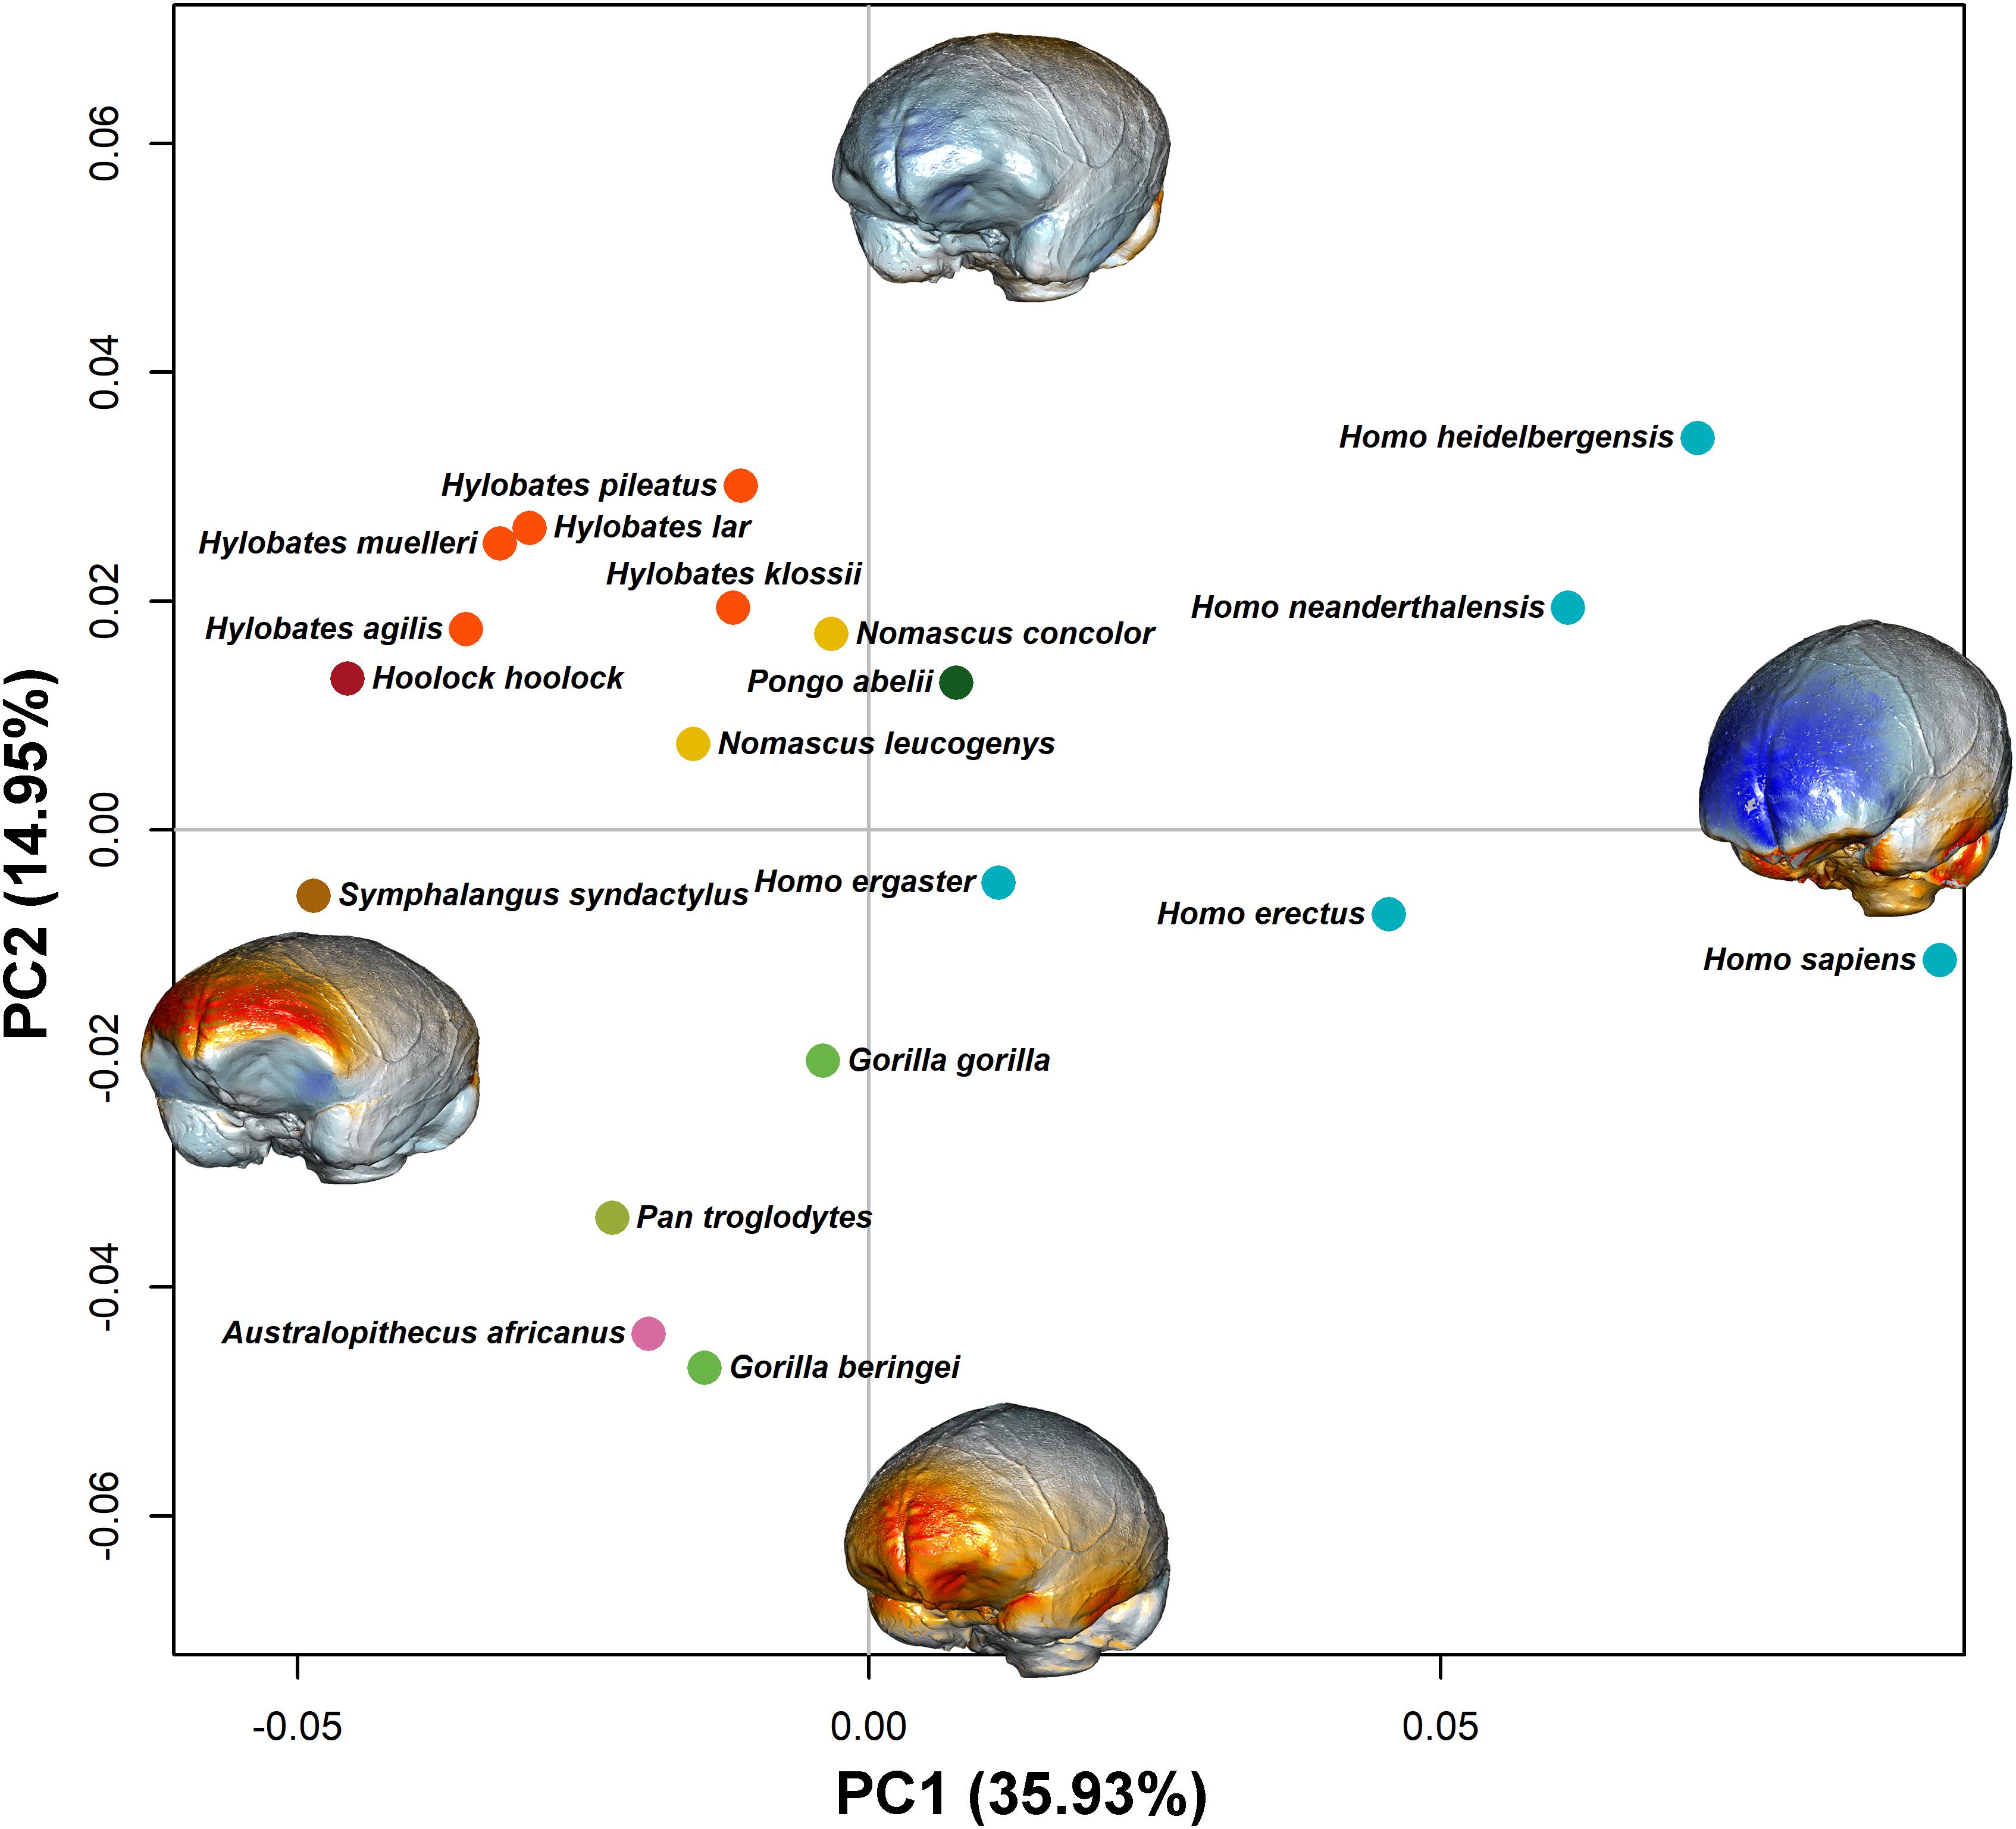 Brain size and evolution